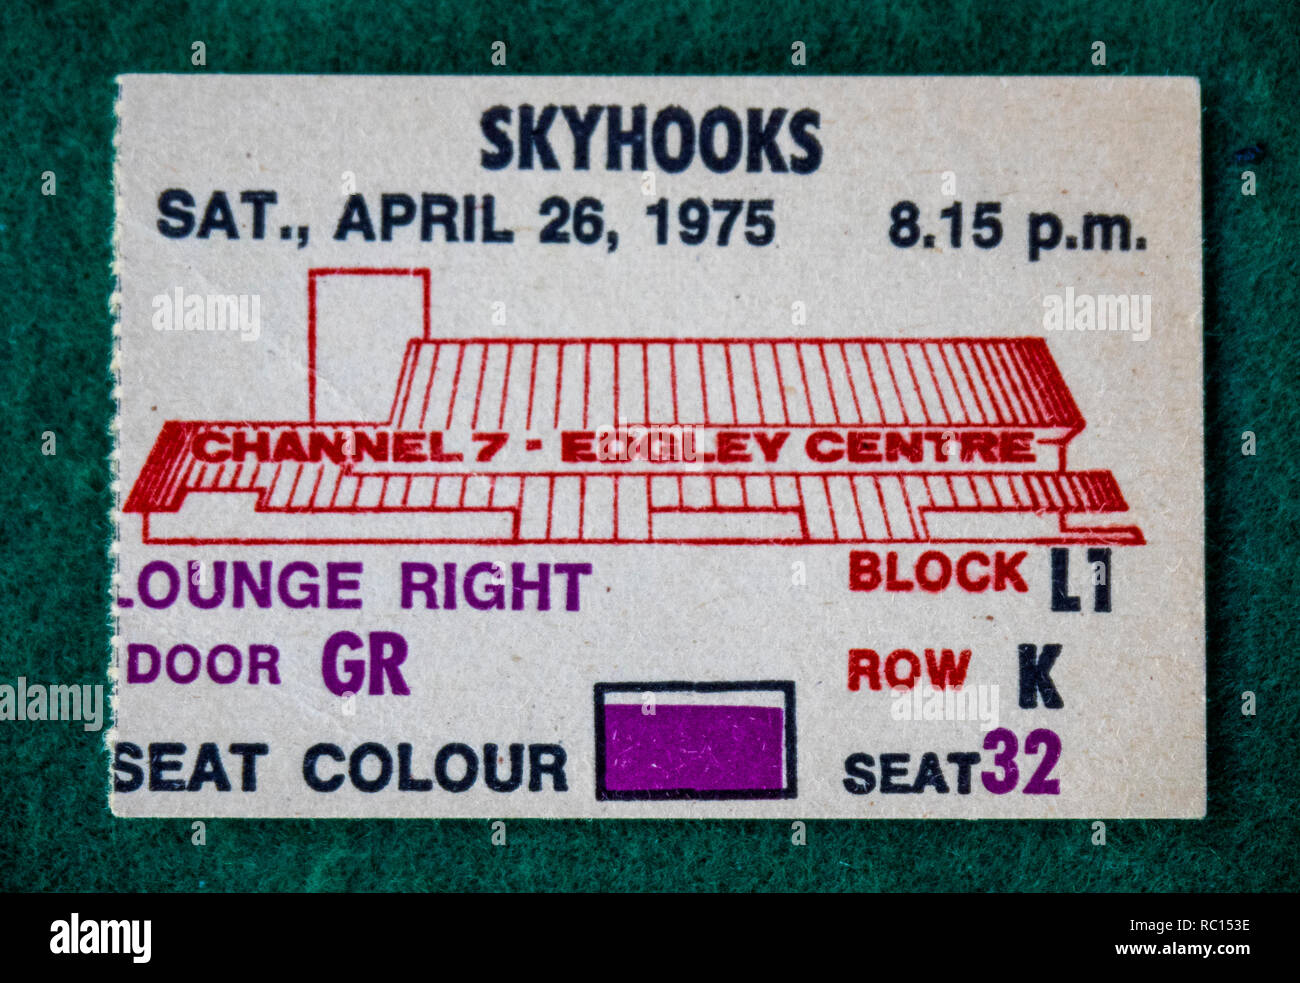 Ticket for Skyhooks concert at Perth Entertainment Centre in 1975 WA Australia. Stock Photo